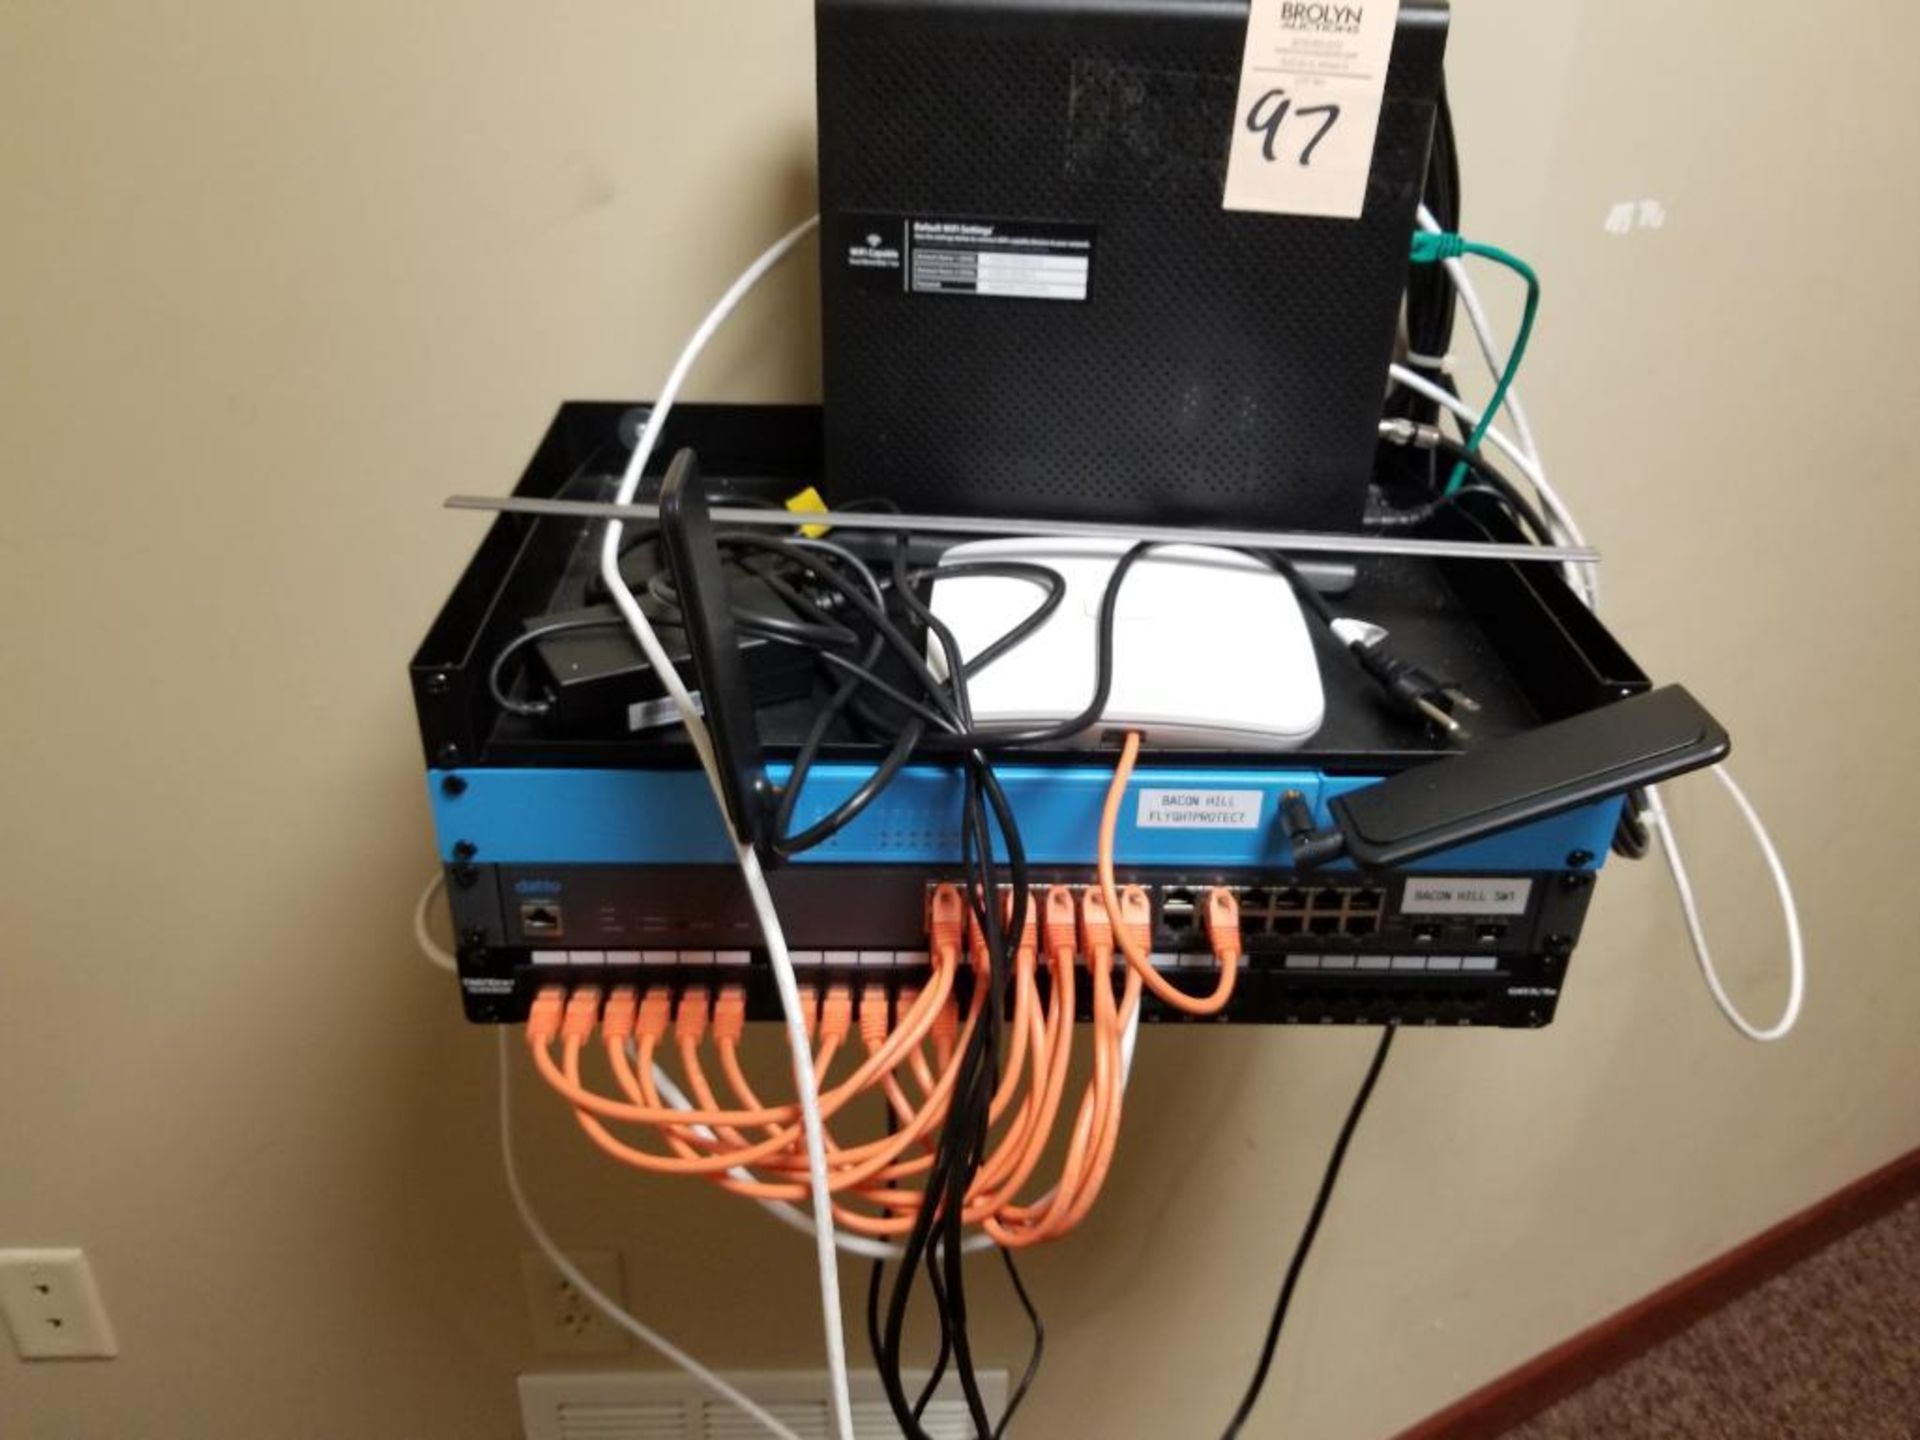 Router and network equipment.